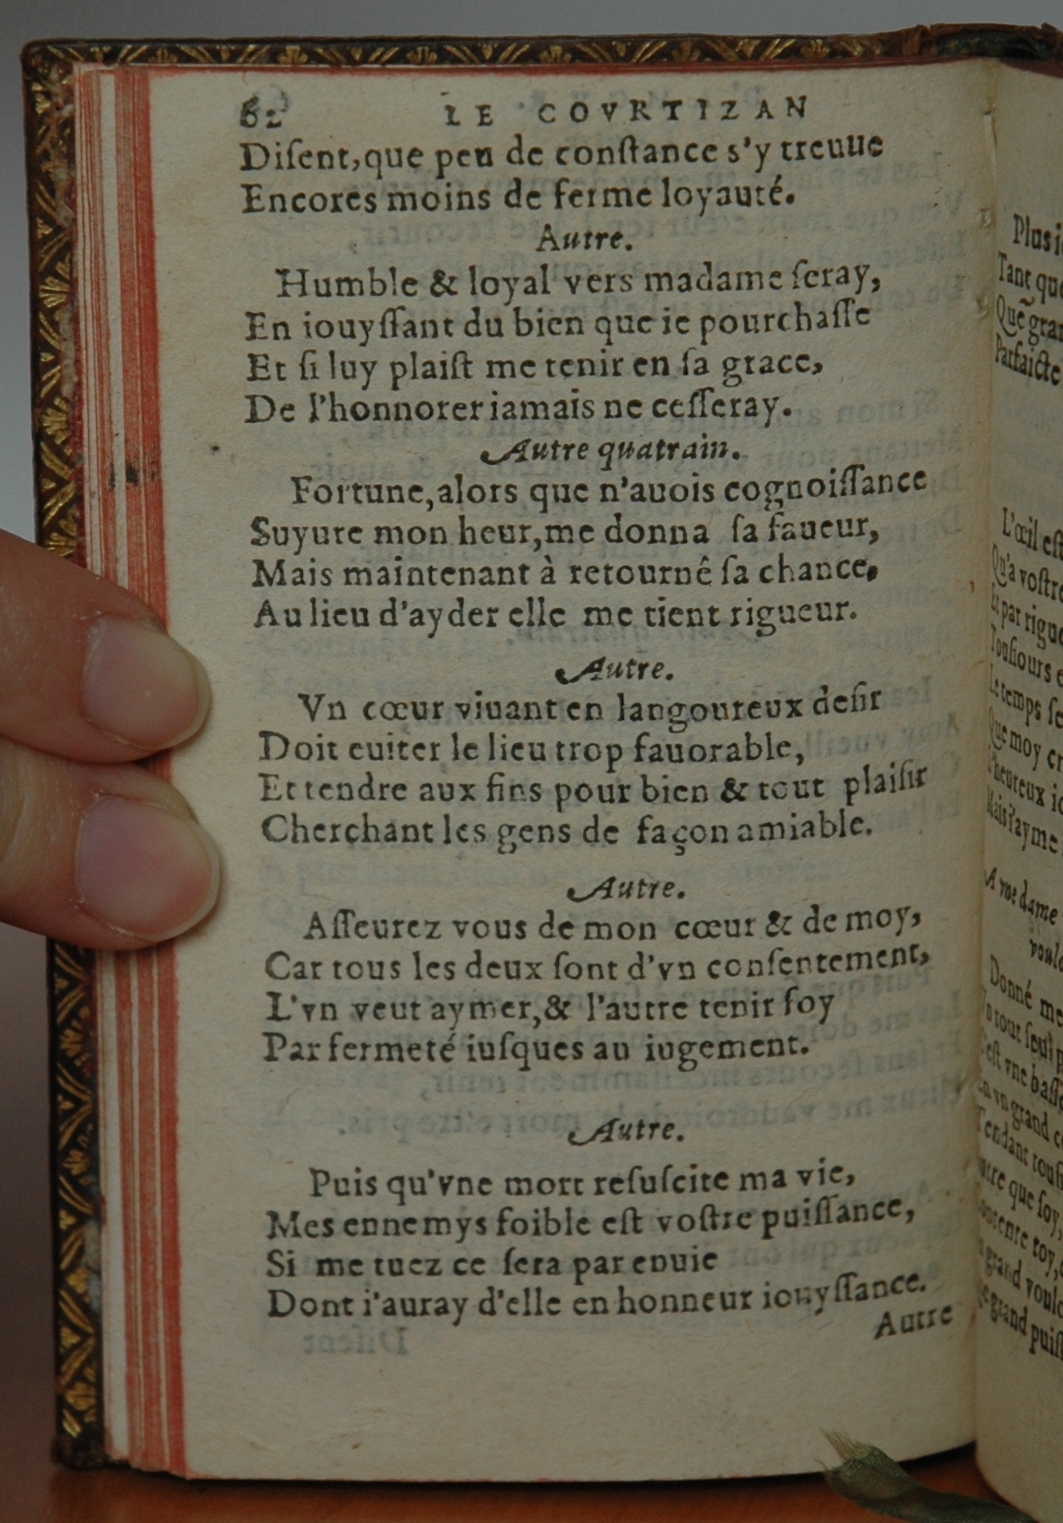 http://eman-archives.org/import/TJI/1582/[1582_Courtizanamoureux_Rigaud]_Page_062.jpg